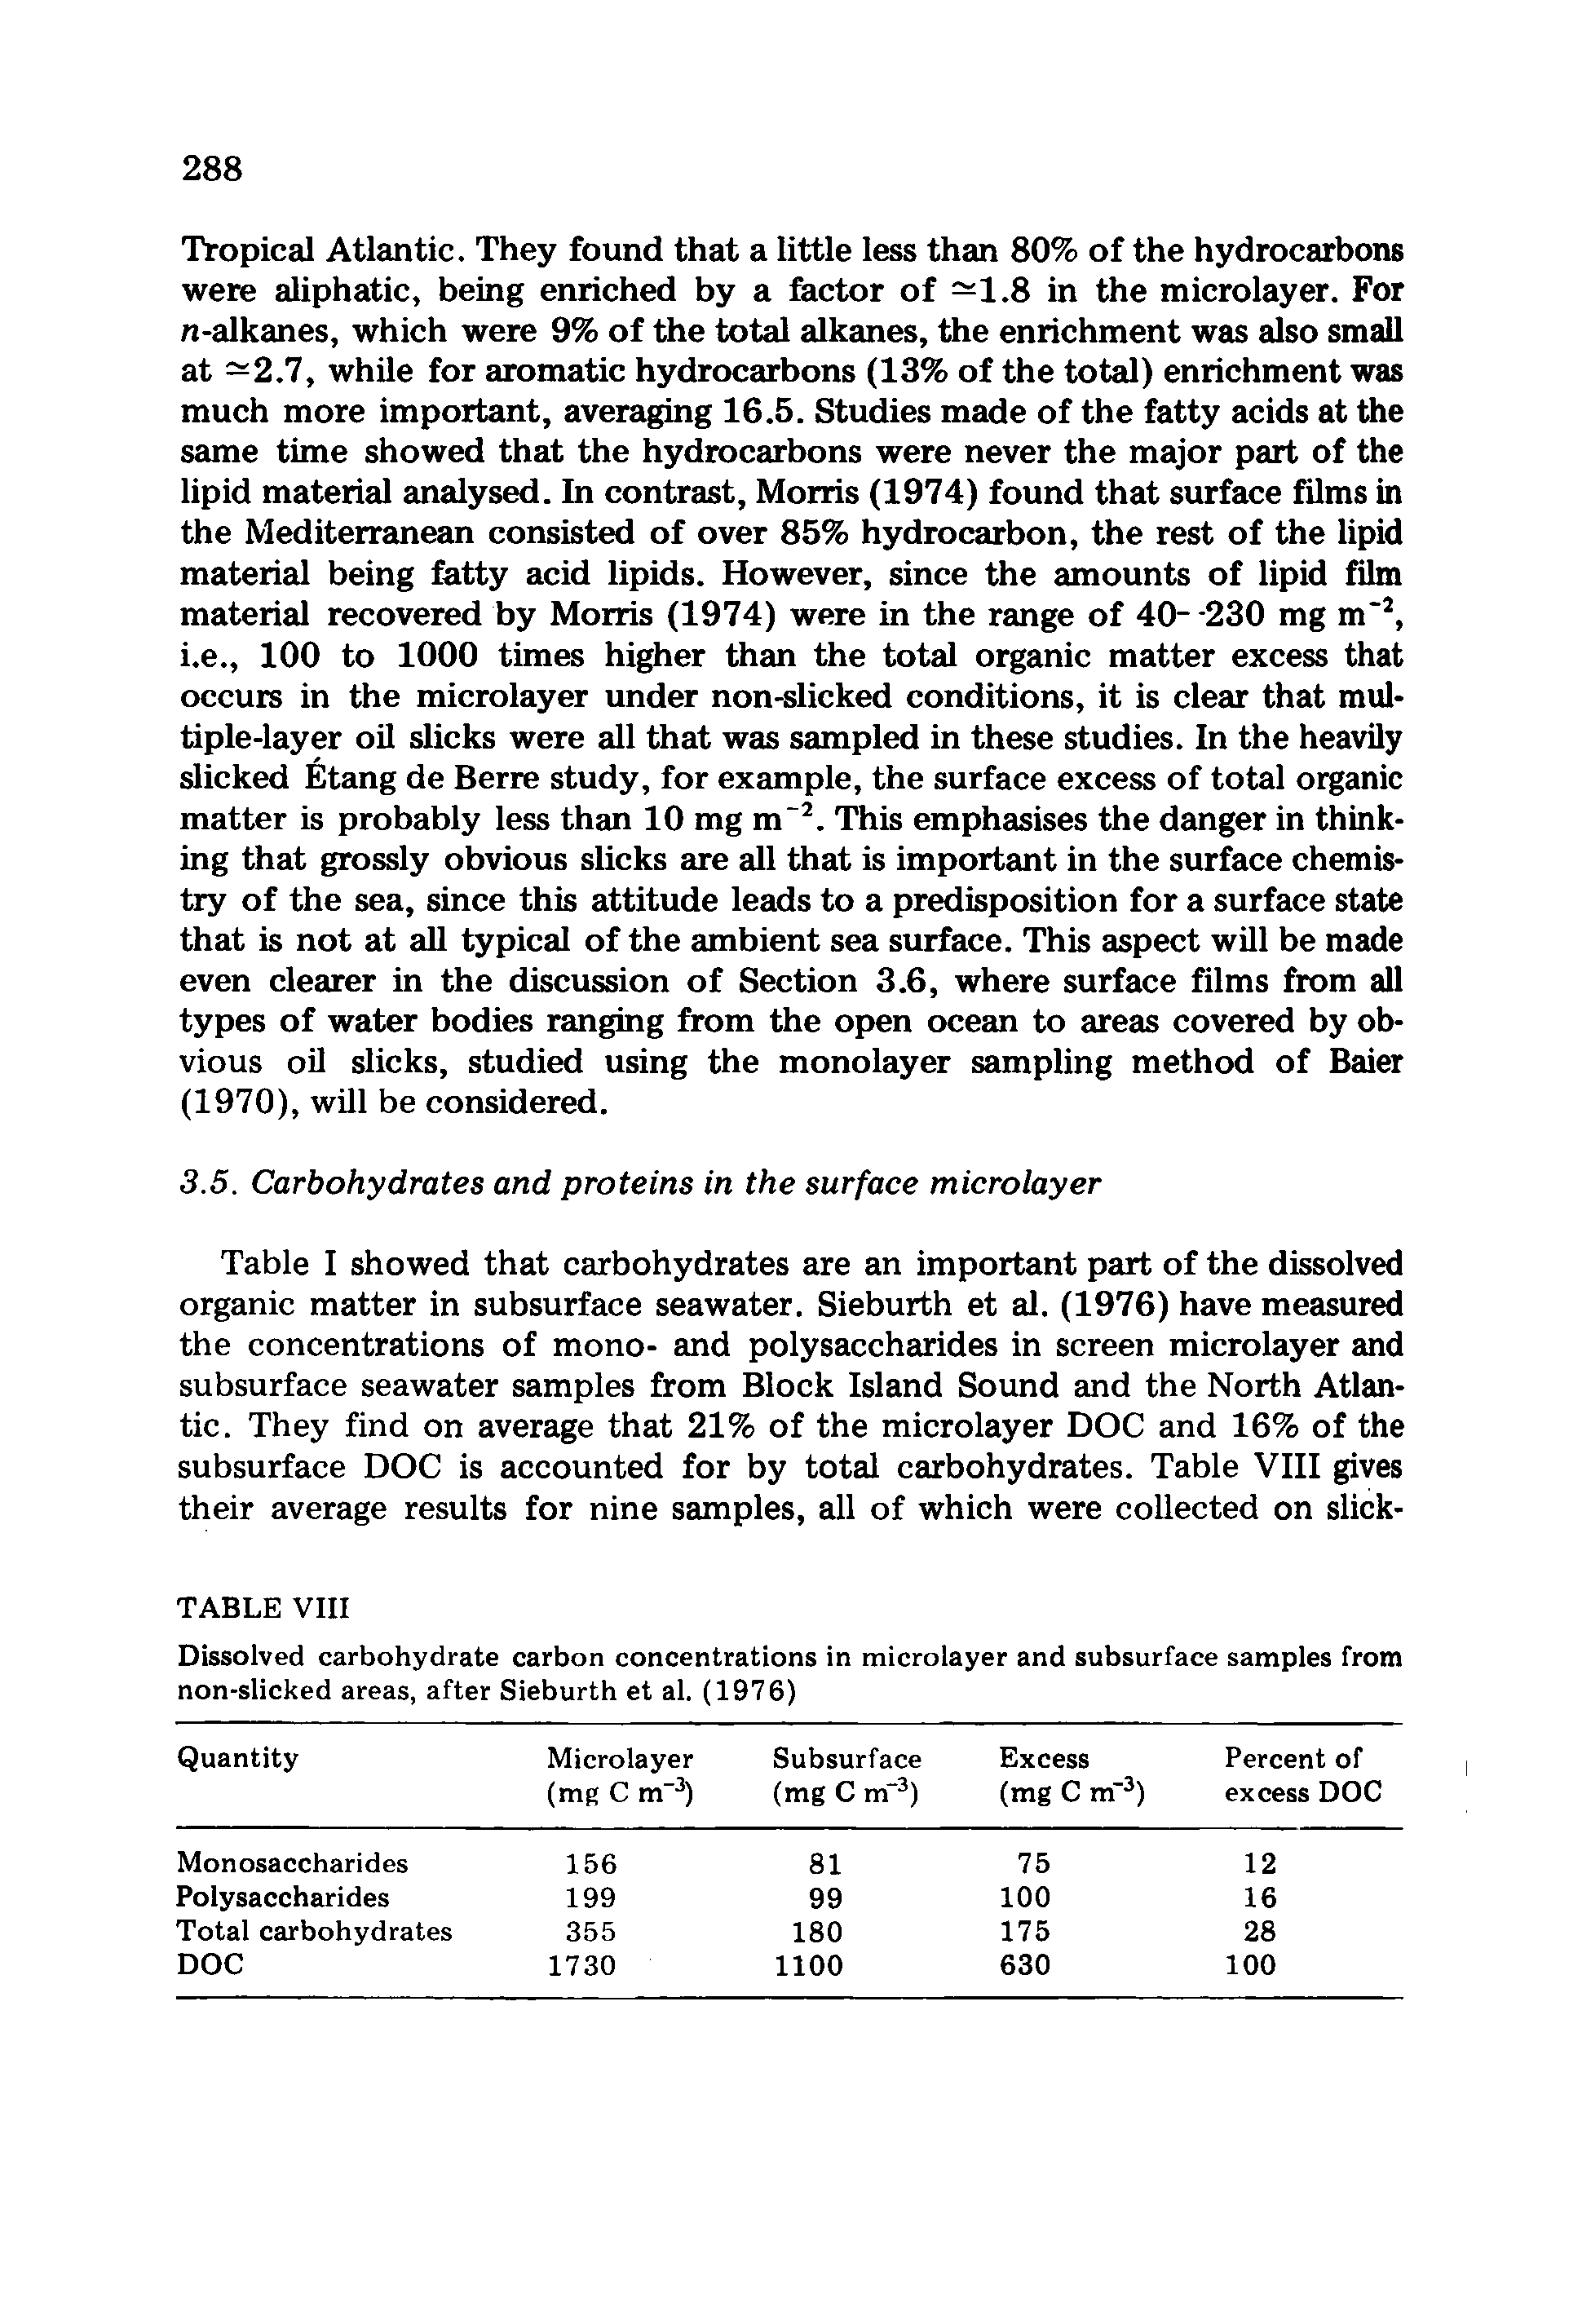 Table I showed that carbohydrates are an important part of the dissolved organic matter in subsurface seawater. Sieburth et al. (1976) have measured the concentrations of mono- and polysaccharides in screen microlayer and subsurface seawater samples from Block Island Sound and the North Atlantic. They find on average that 21% of the microlayer DOC and 16% of the subsurface DOC is accounted for by total carbohydrates. Table VIII gives their average results for nine samples, all of which were collected on slick-...